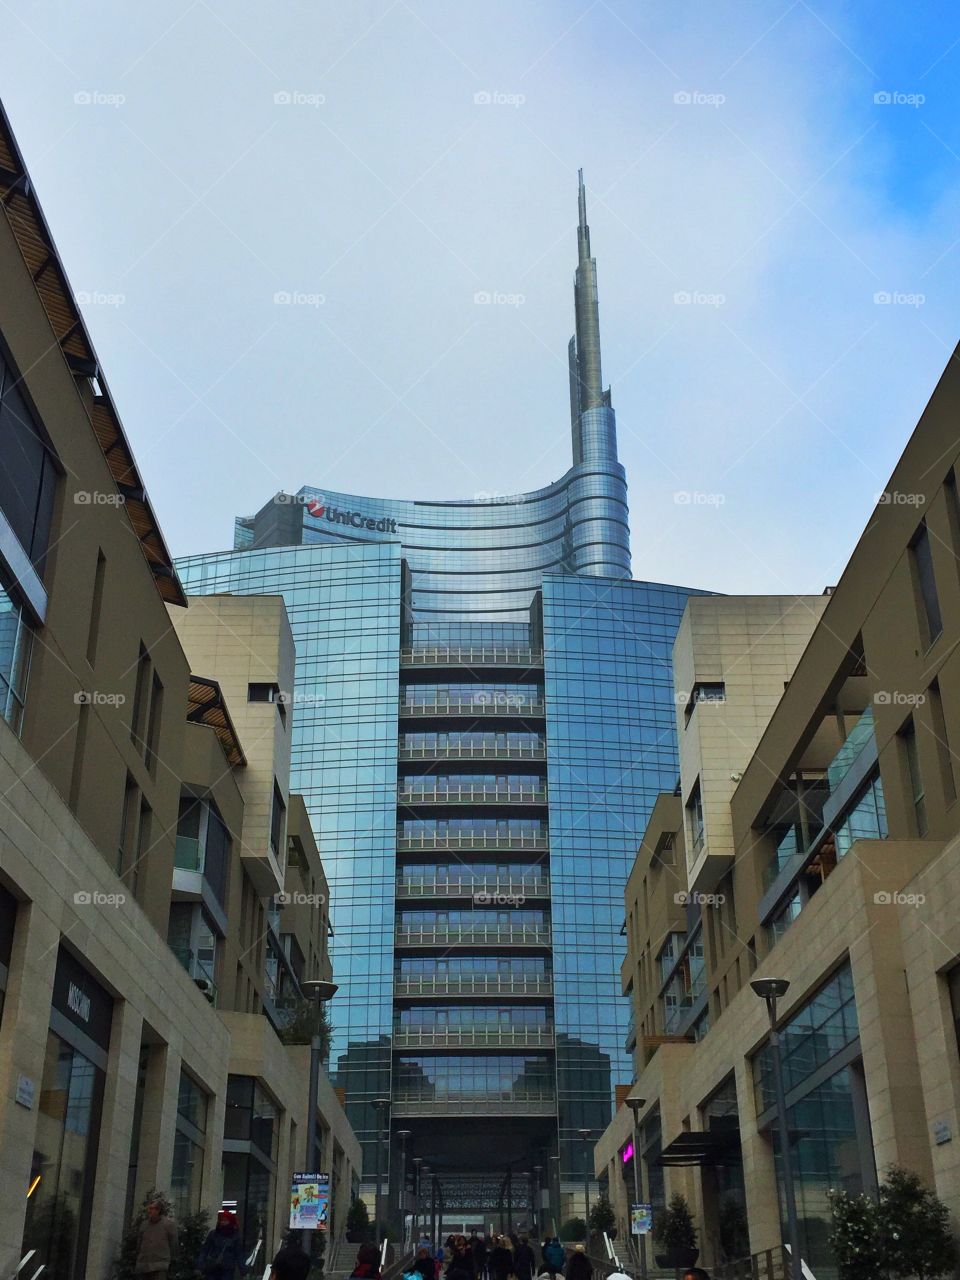 A big modern building in the financial district of Milan,Italy